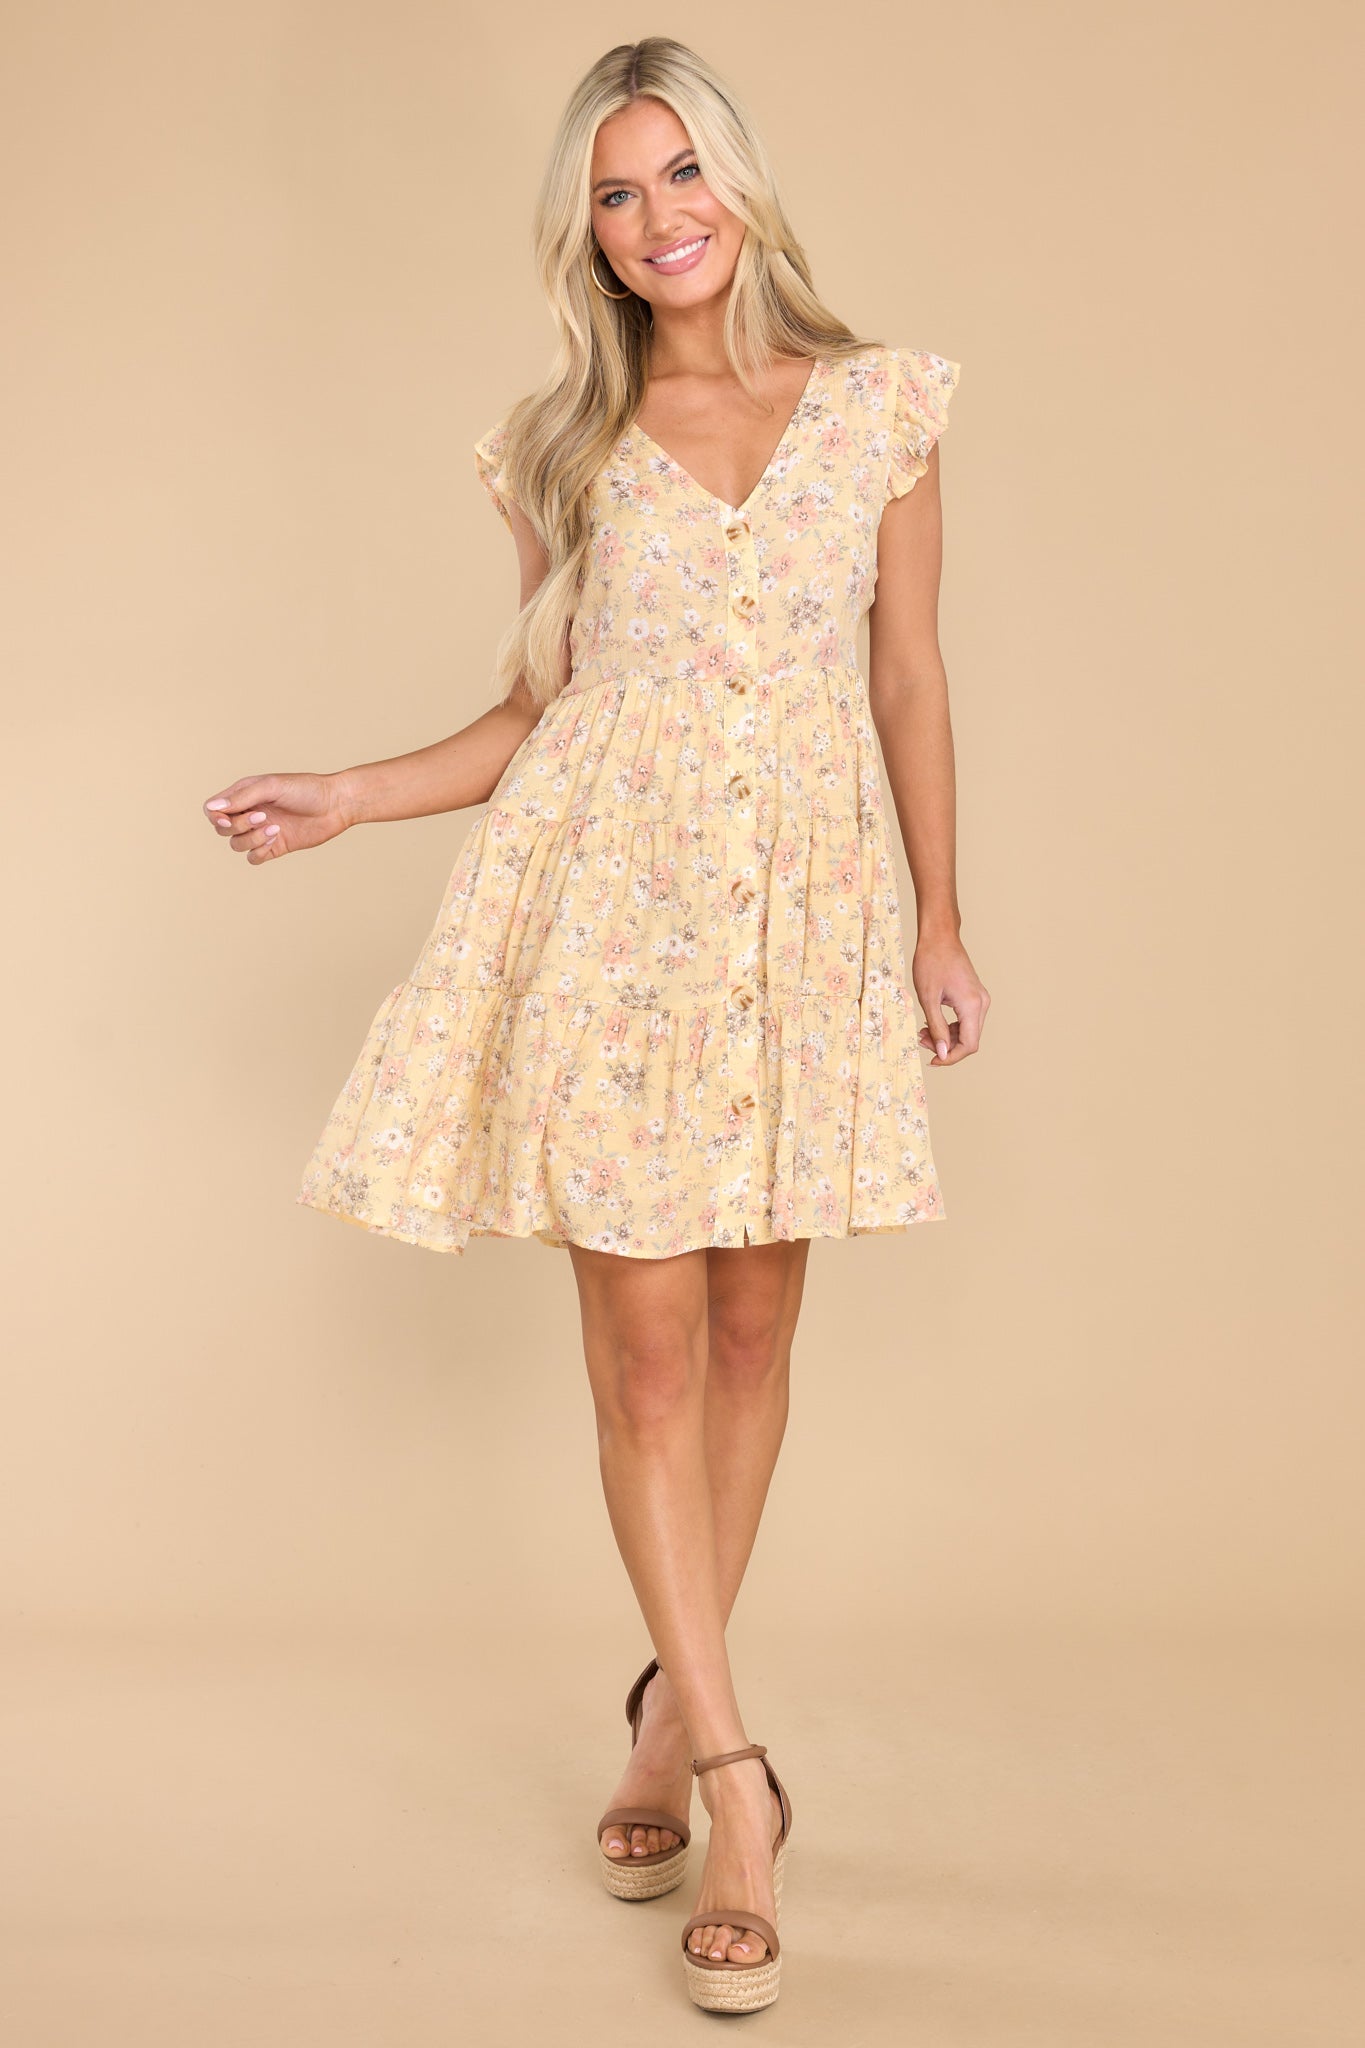 4 With All My Love Pastel Yellow Floral Print Dress at reddress.com